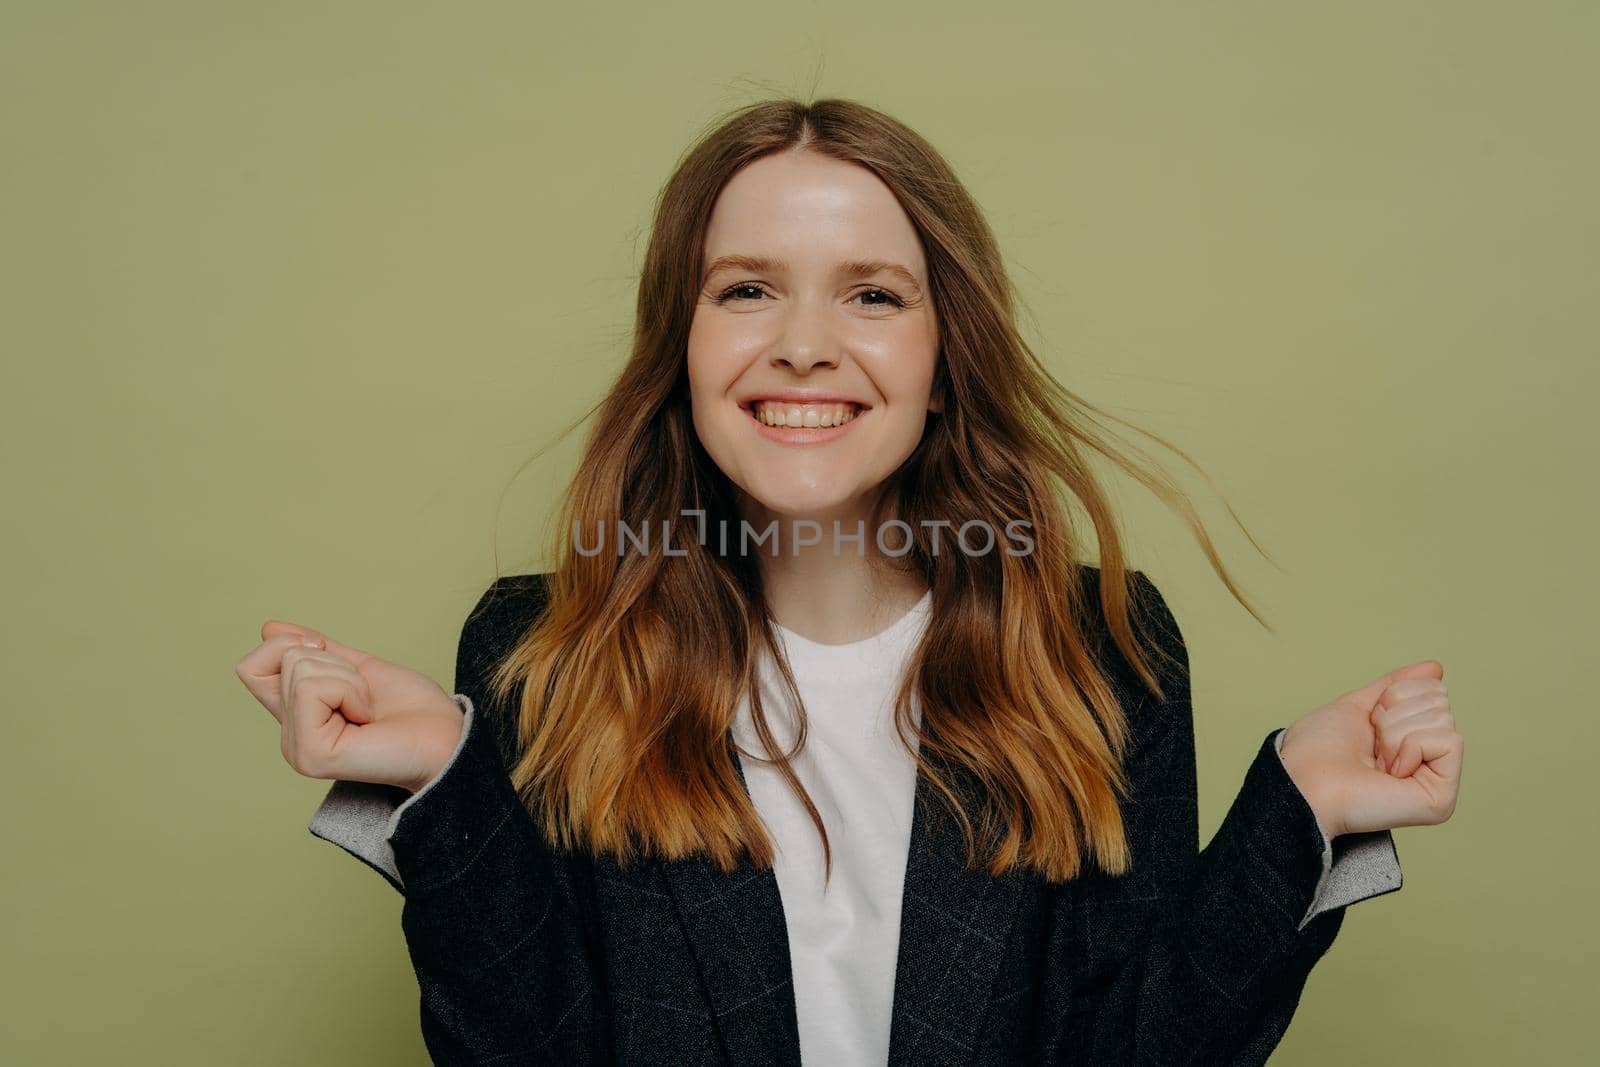 I did it. Smiling young woman holding hands up demonstrating excitement while looking at camera wearing dark jacket and white top, posing against light studio background. Human emotions concept